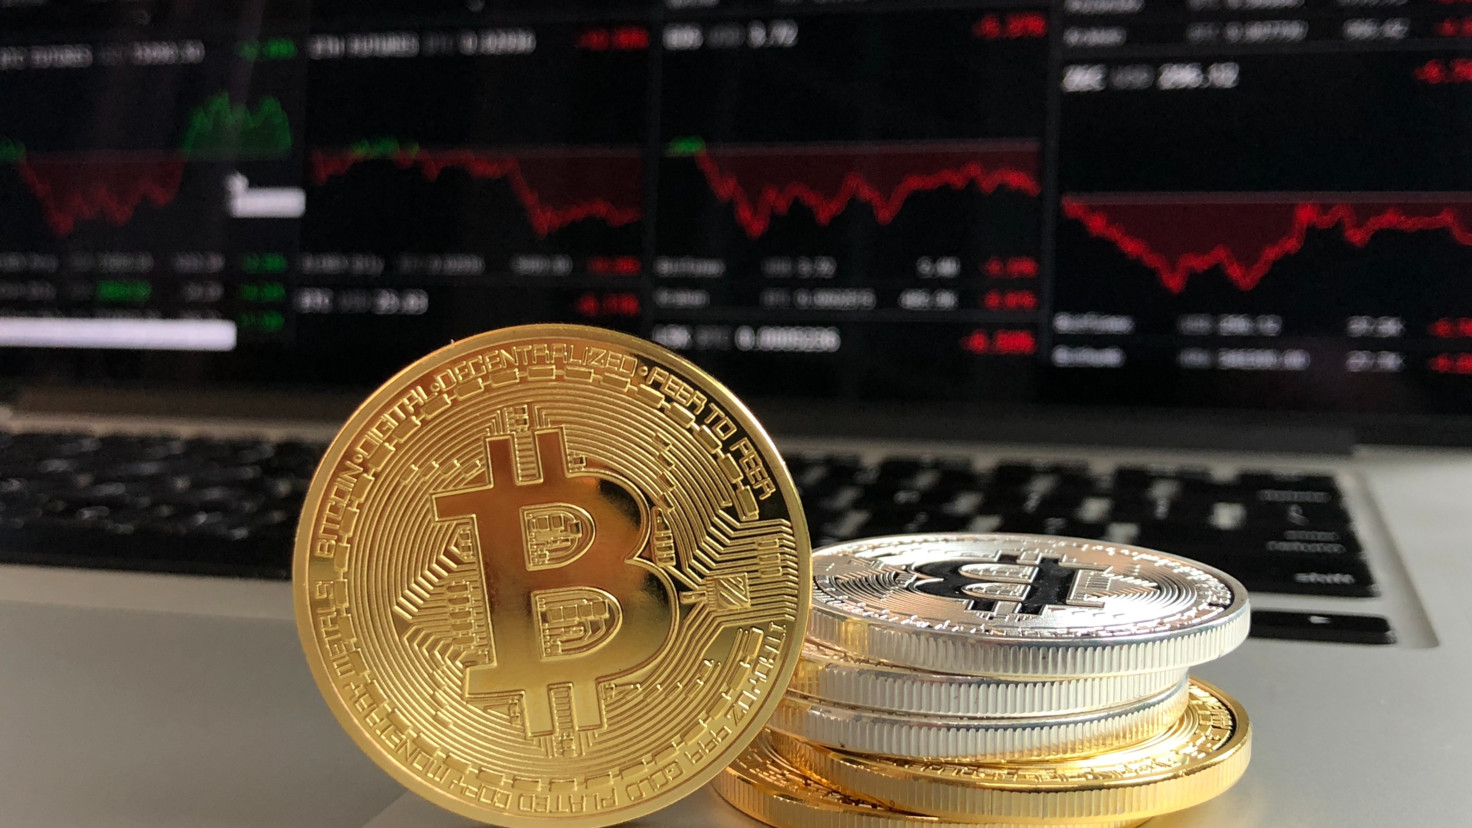 Gold and silver bitcoins in front of a trading chart on a computer screen